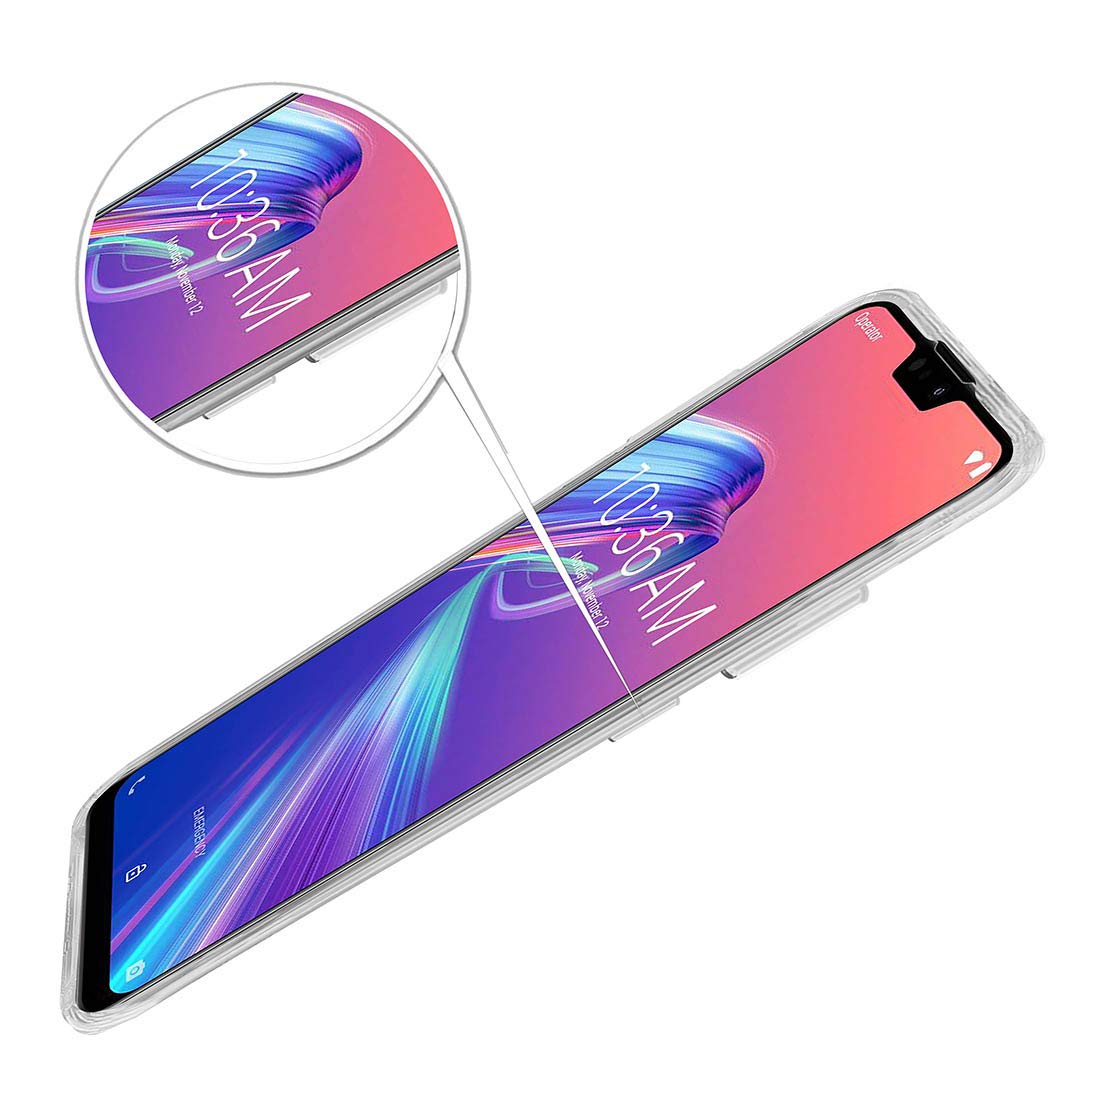 Clear Case for Asus Zenfone Max Pro M2 ZB631KL